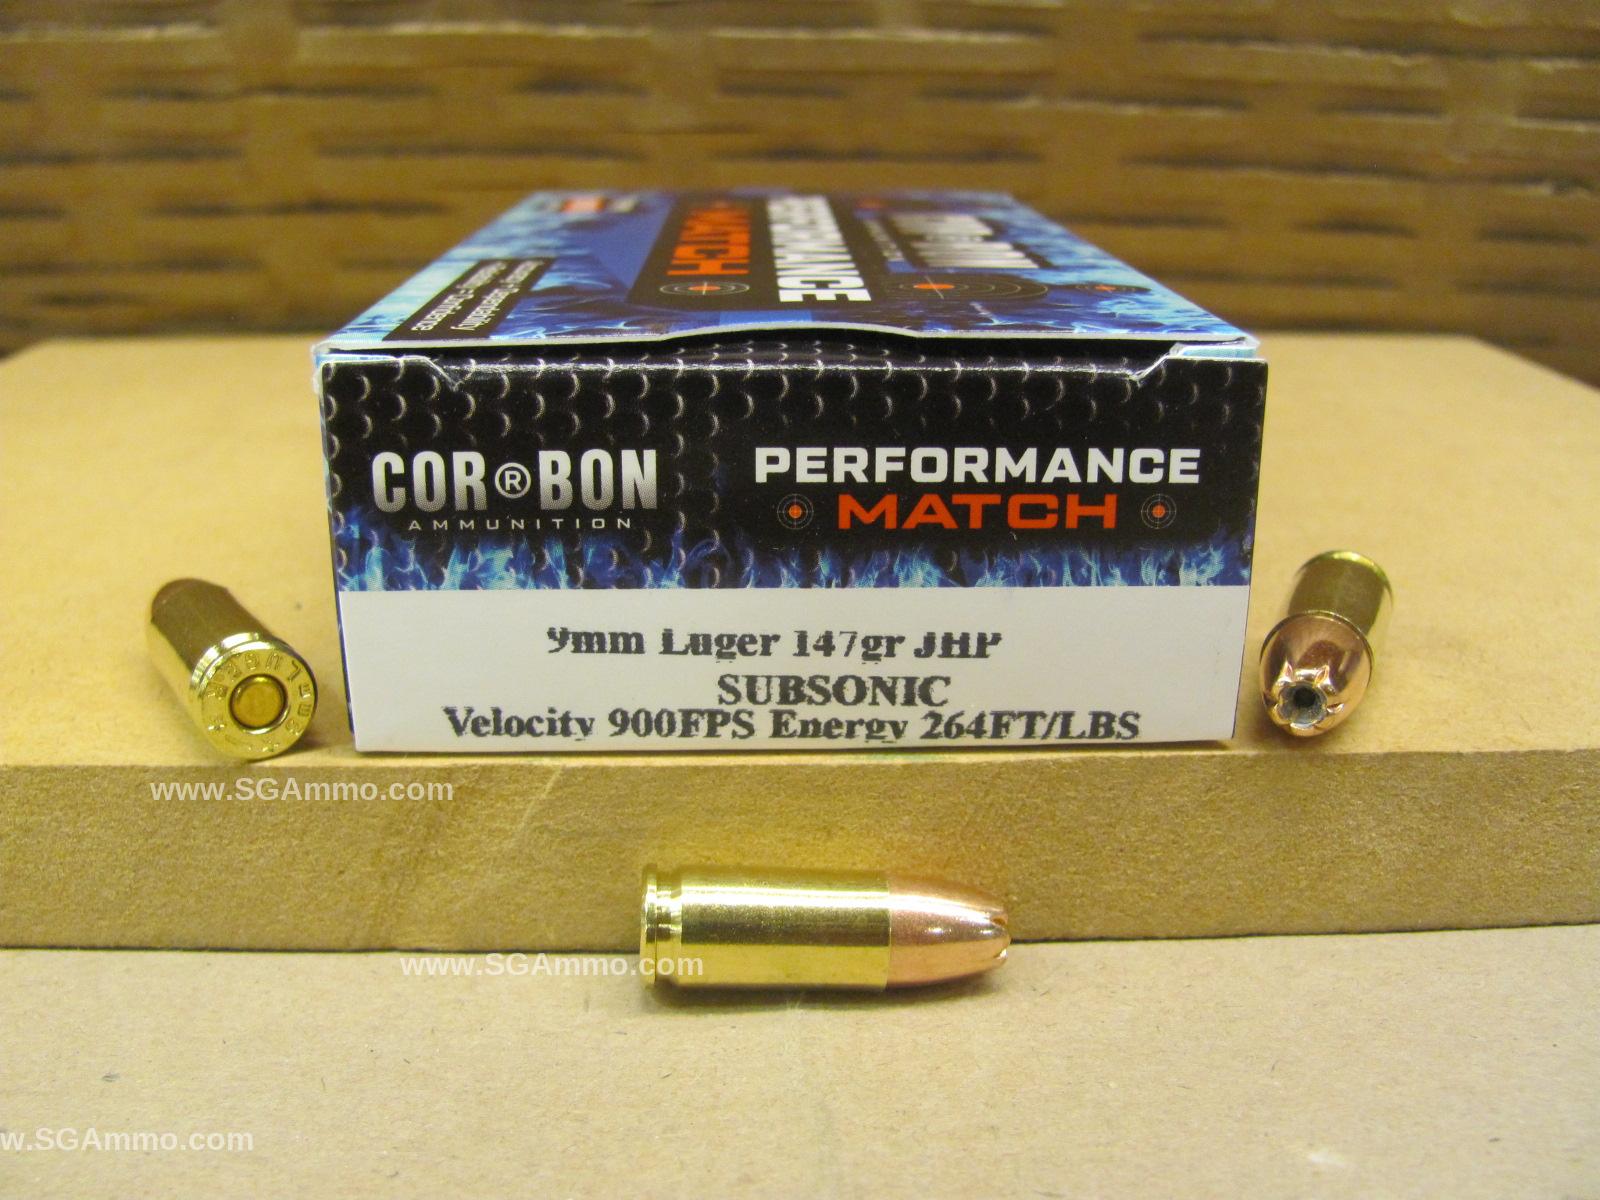 1250 Round Case - 9mm Luger 147 Grain Jacketed Hollow Point Subsonic Corbon Performance Match Ammo - PM09S14750